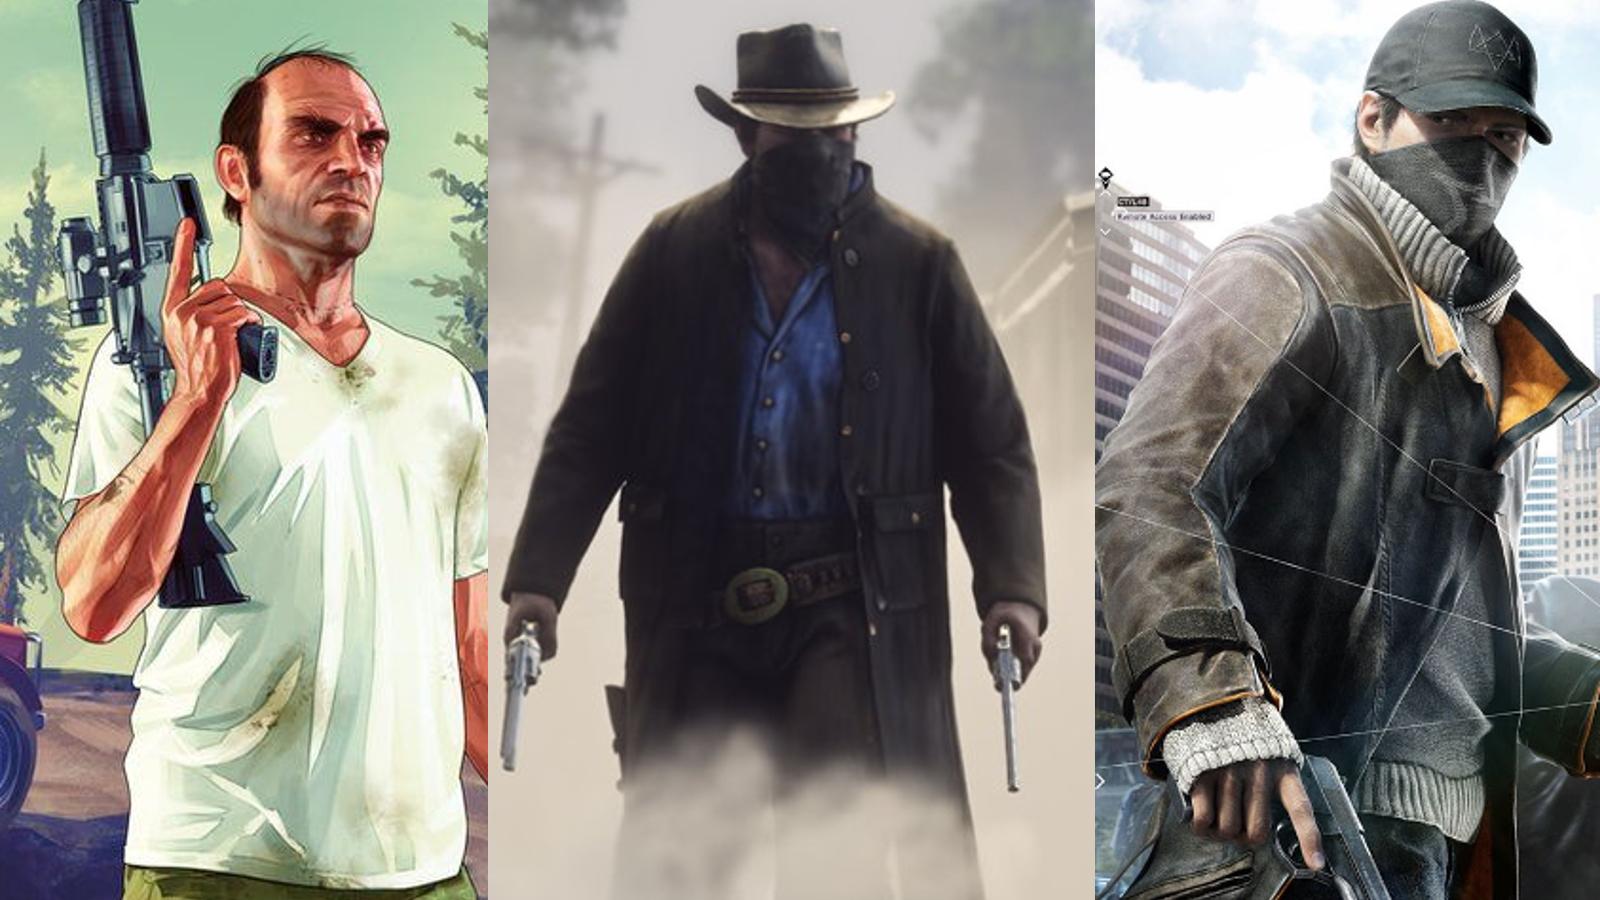 gta, watch dogs, and red dead cover art